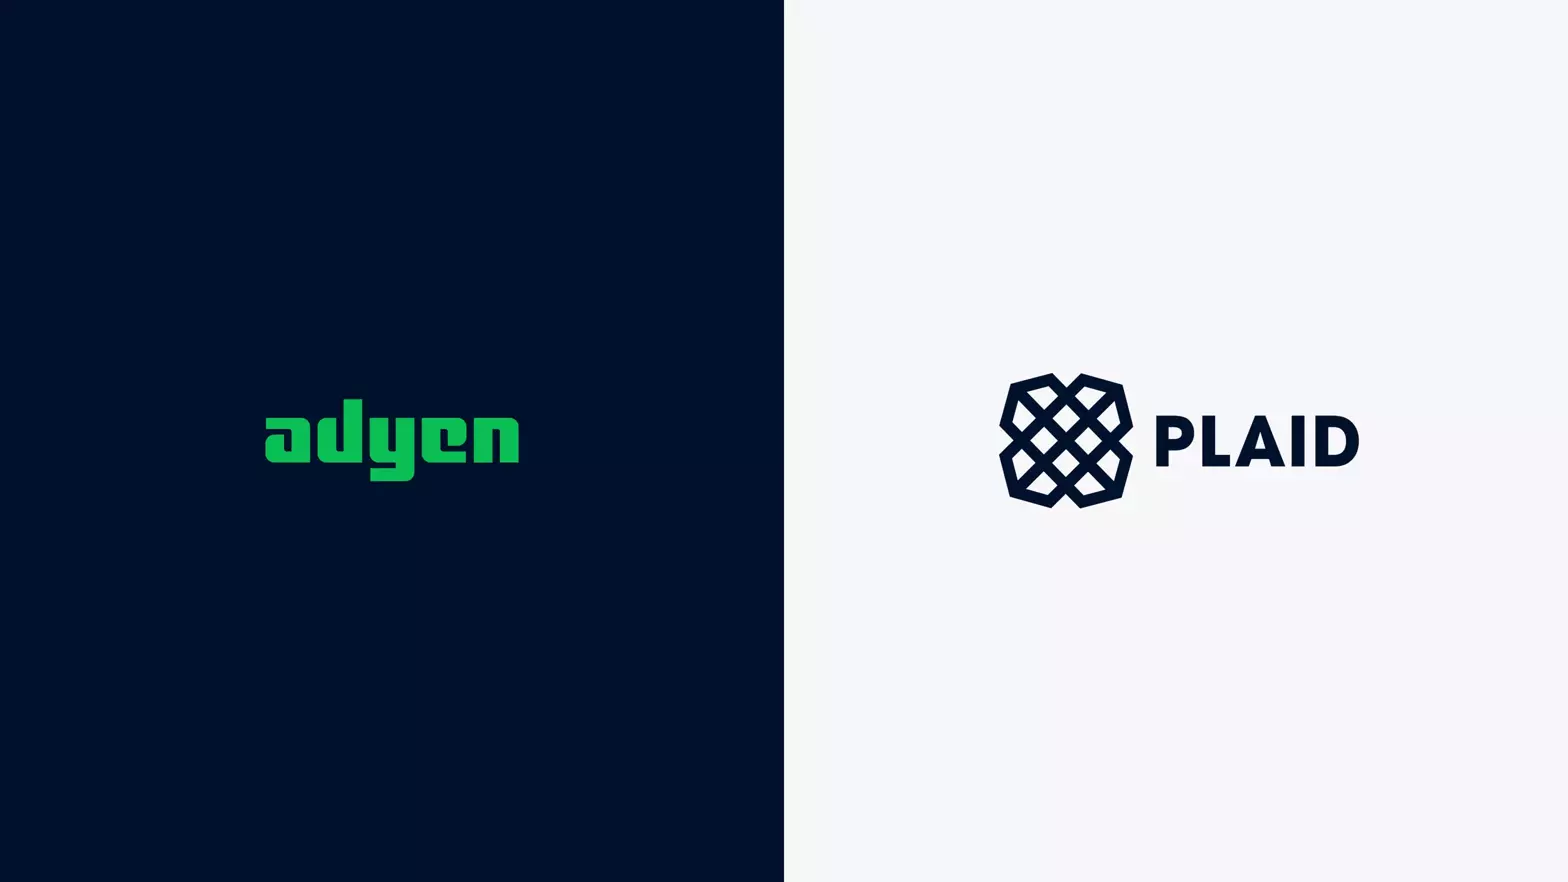 Adyen partners with Plaid to offer Pay by Bank